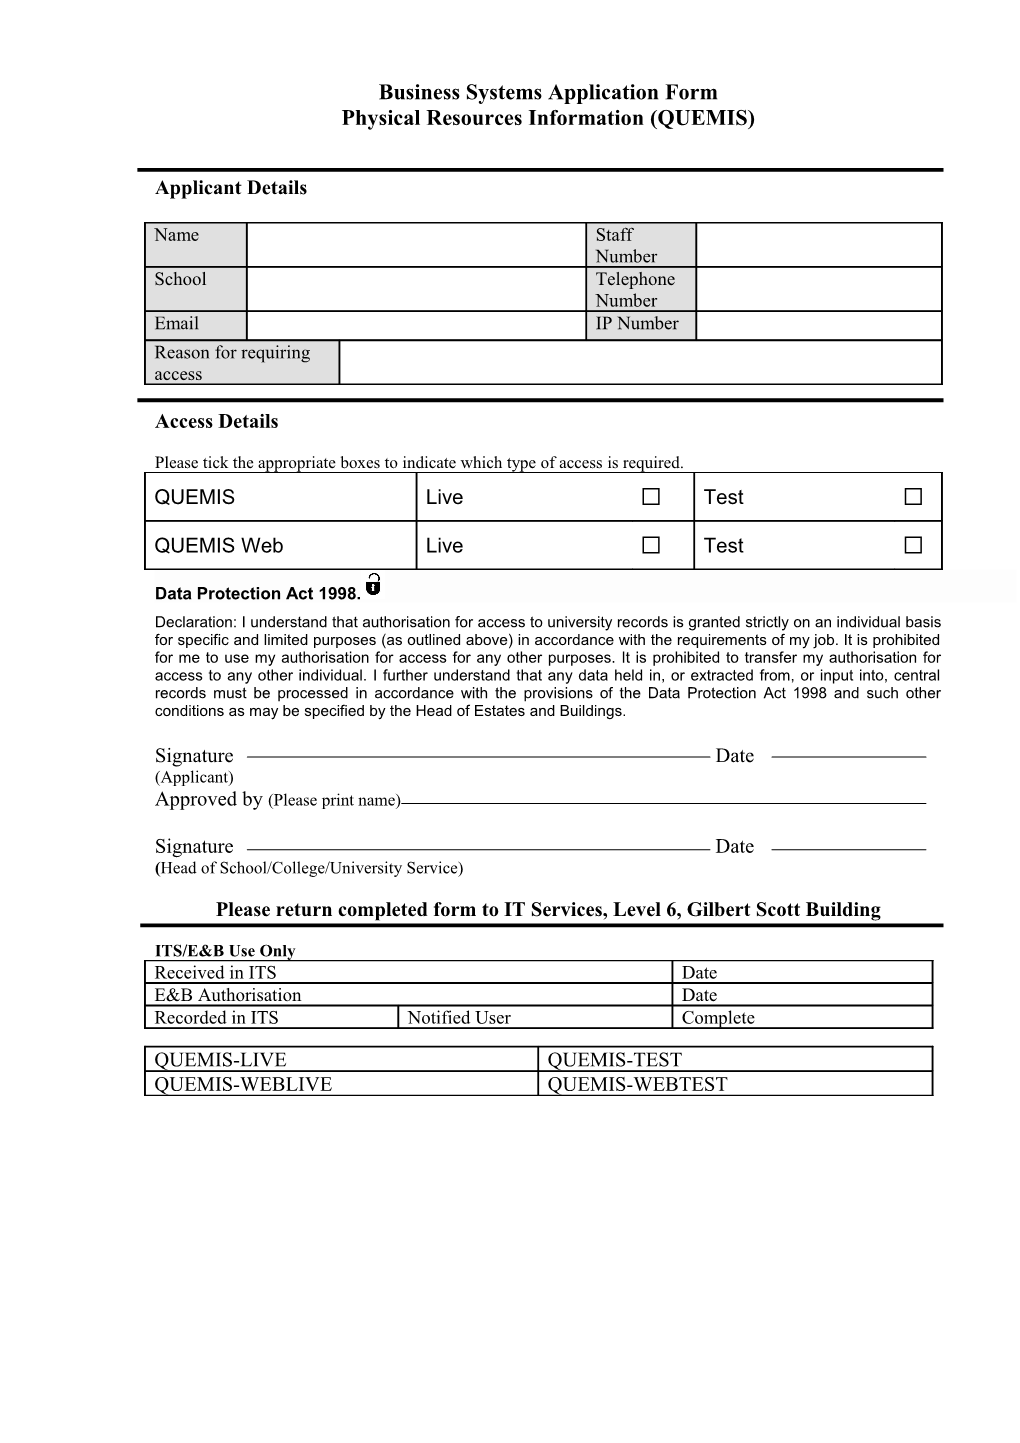 Business Systems Application Form for Access to Student Records s1